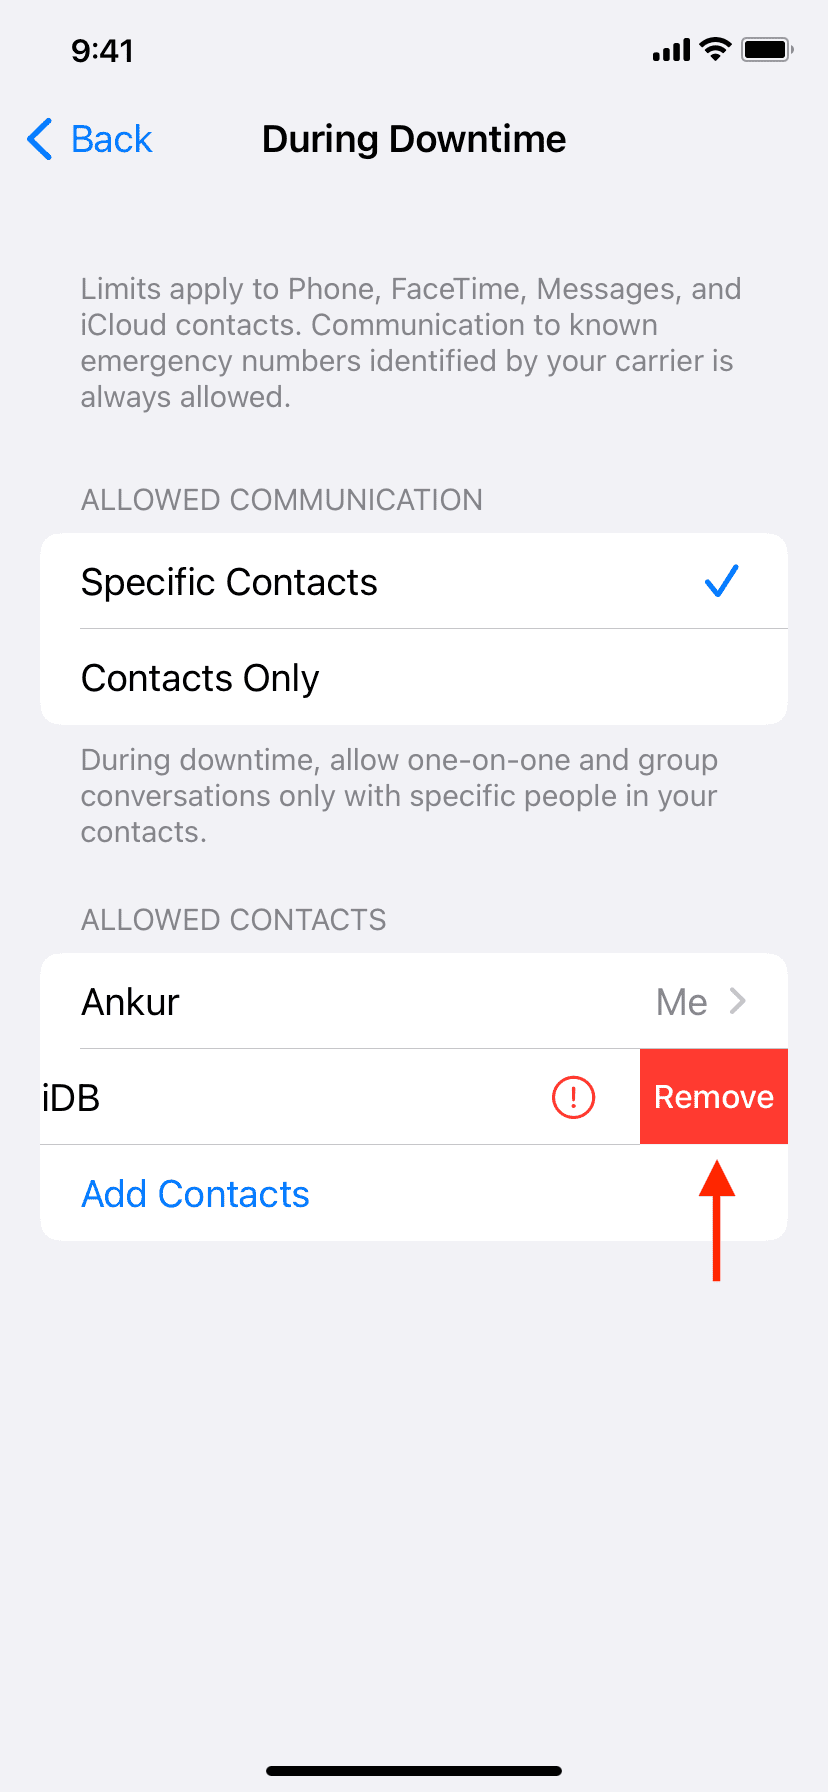 Remove contact added to During Downtime Communication Limits on iPhone